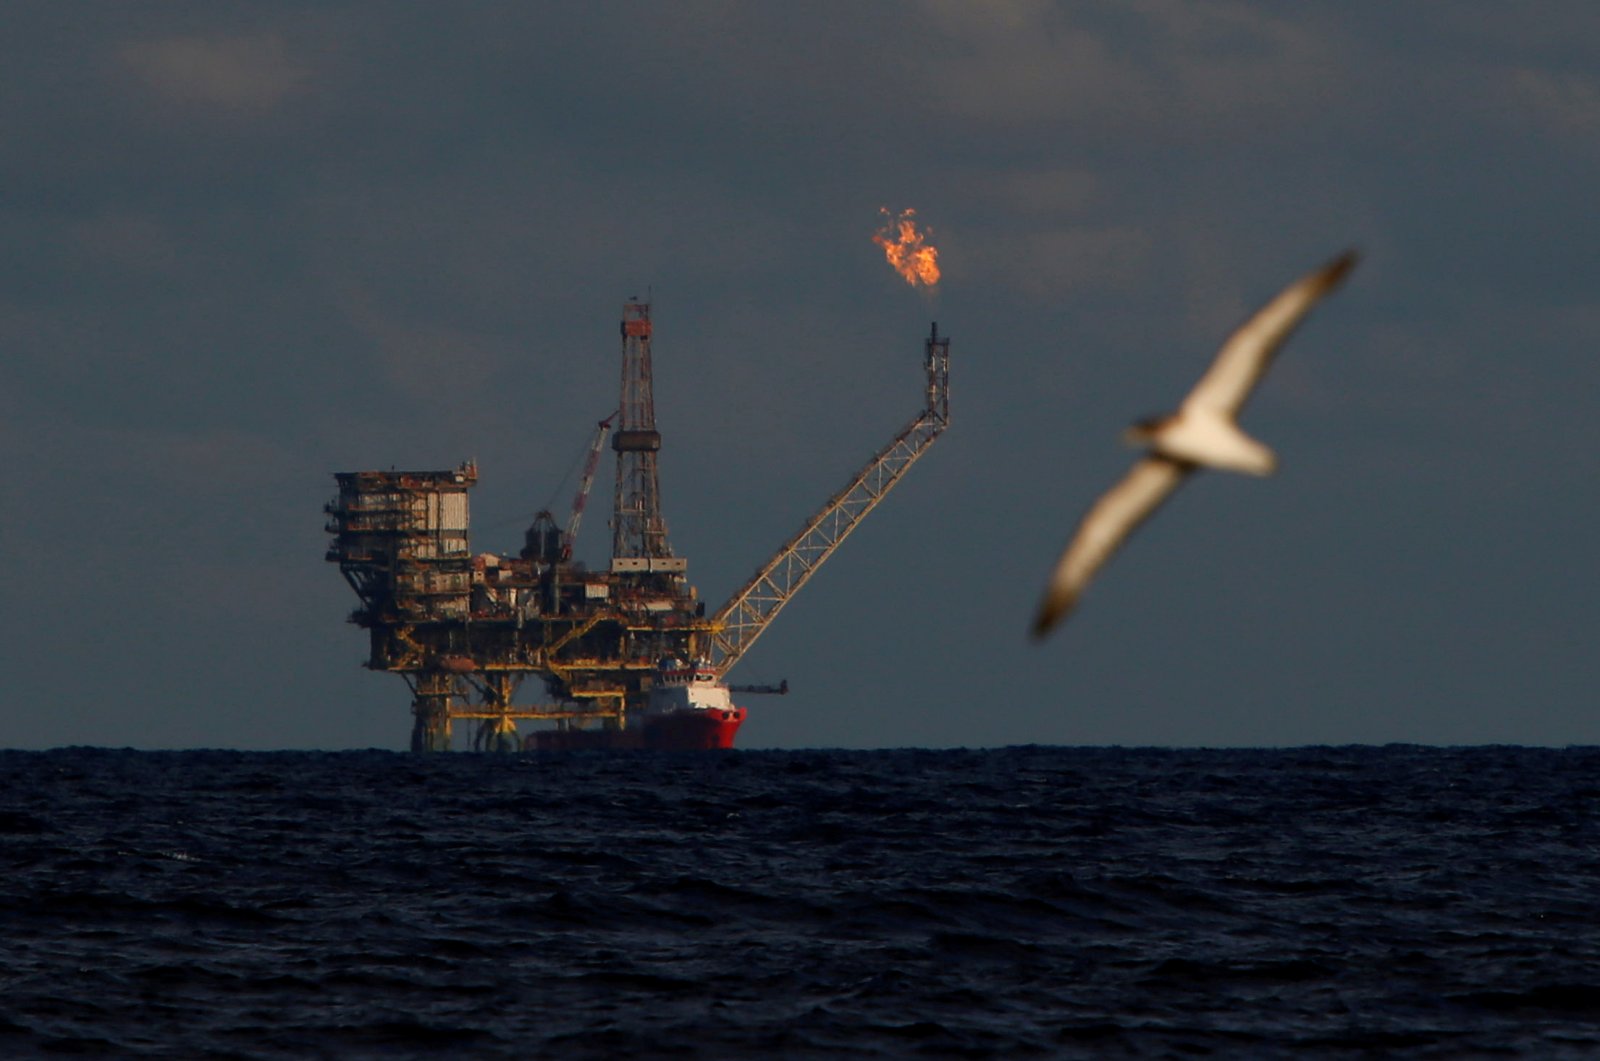 A seagull flies in front of an oil platform in the Bouri Oilfield some 70 nautical miles north of the coast of Libya, October 5, 2017. ( REUTERS Photo)